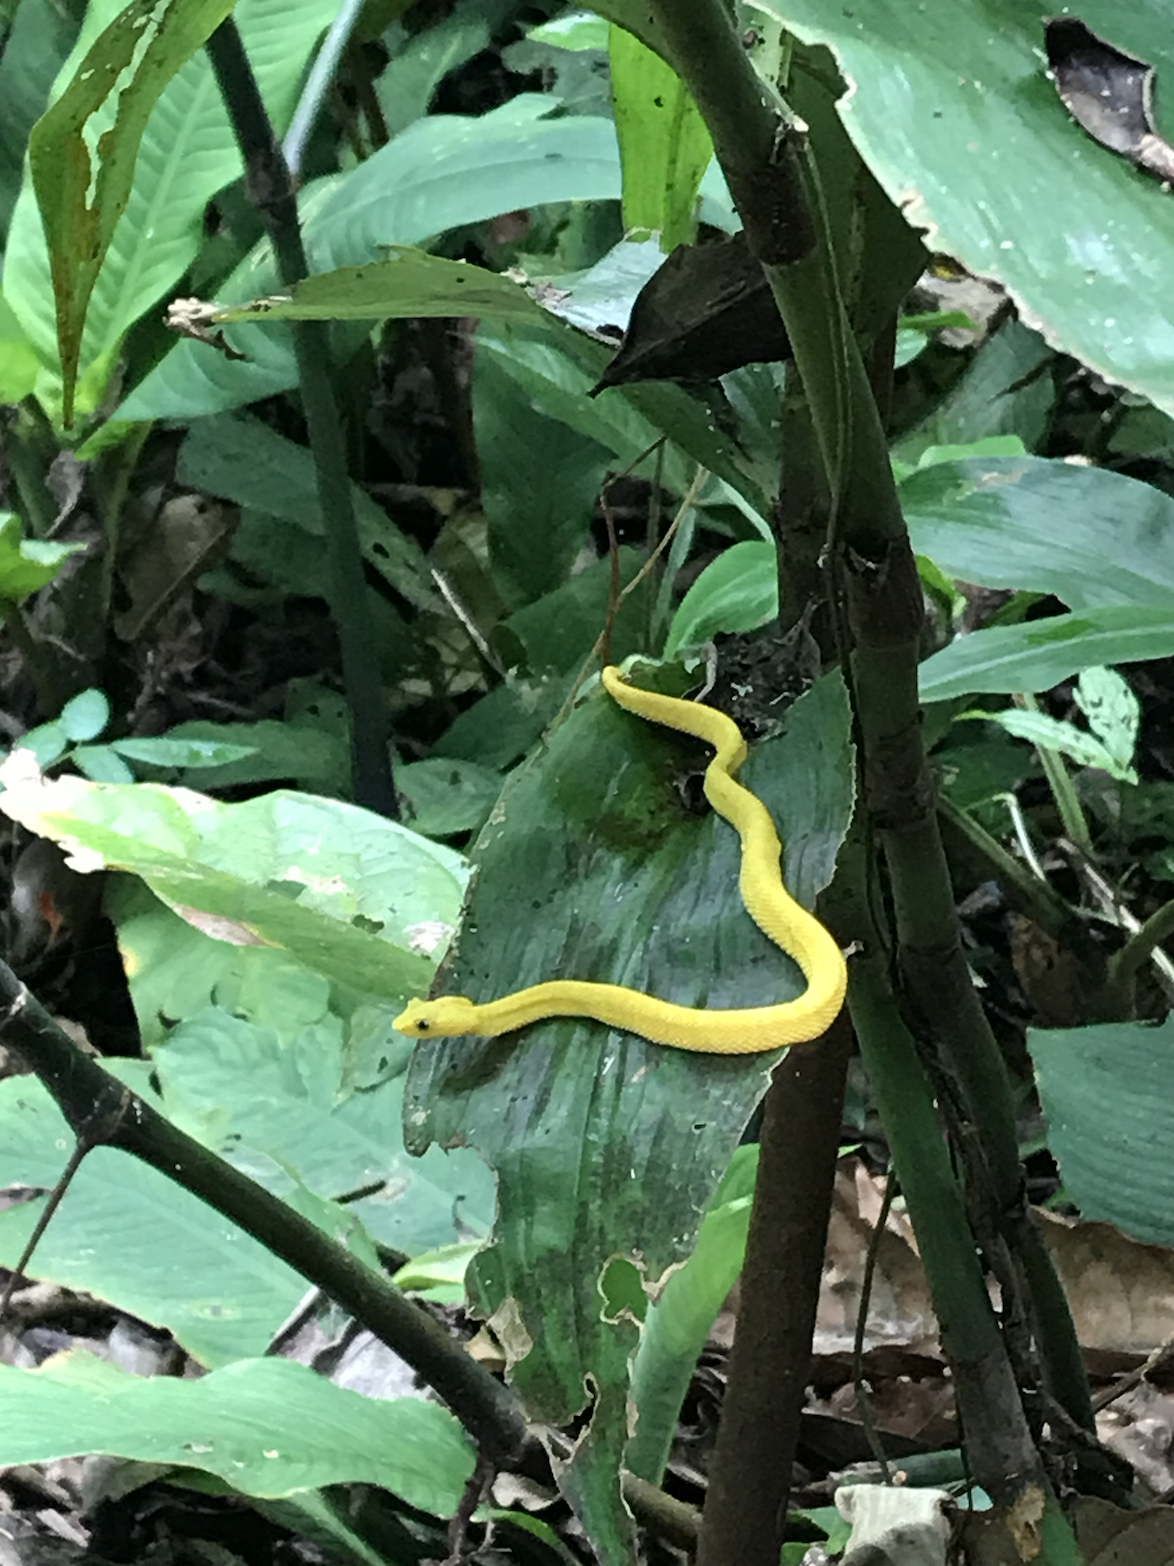 A highly venemous eyelash palm pit viper in the tropical rainforest of Costa Rica